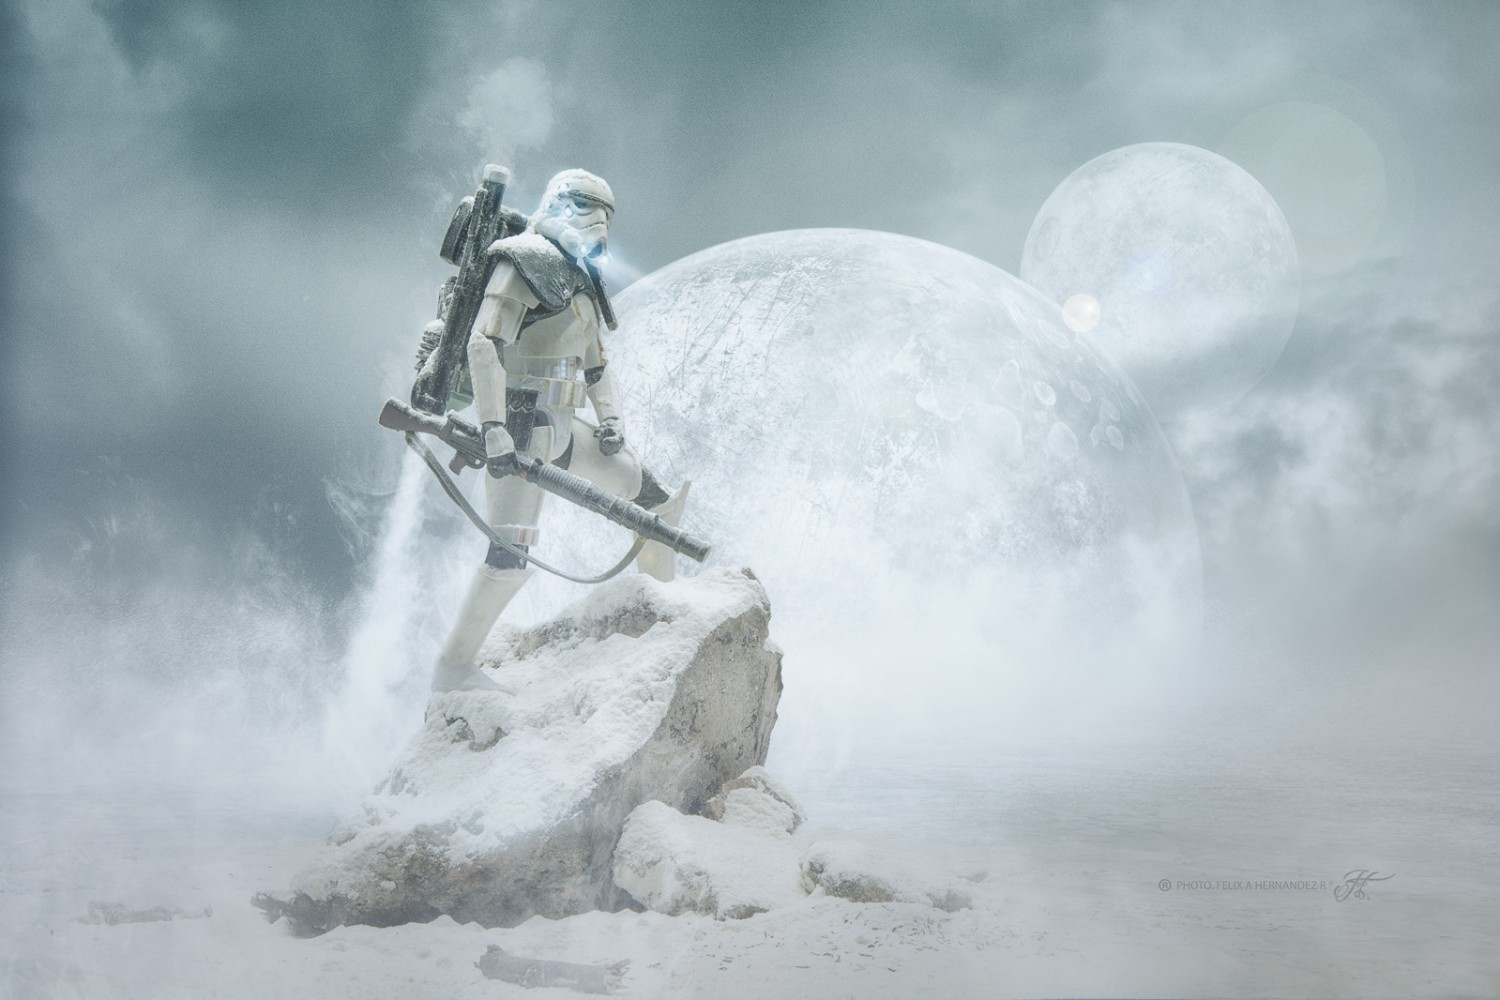 Capturing Epic Star Wars Scenes with Toy Stormtroopers